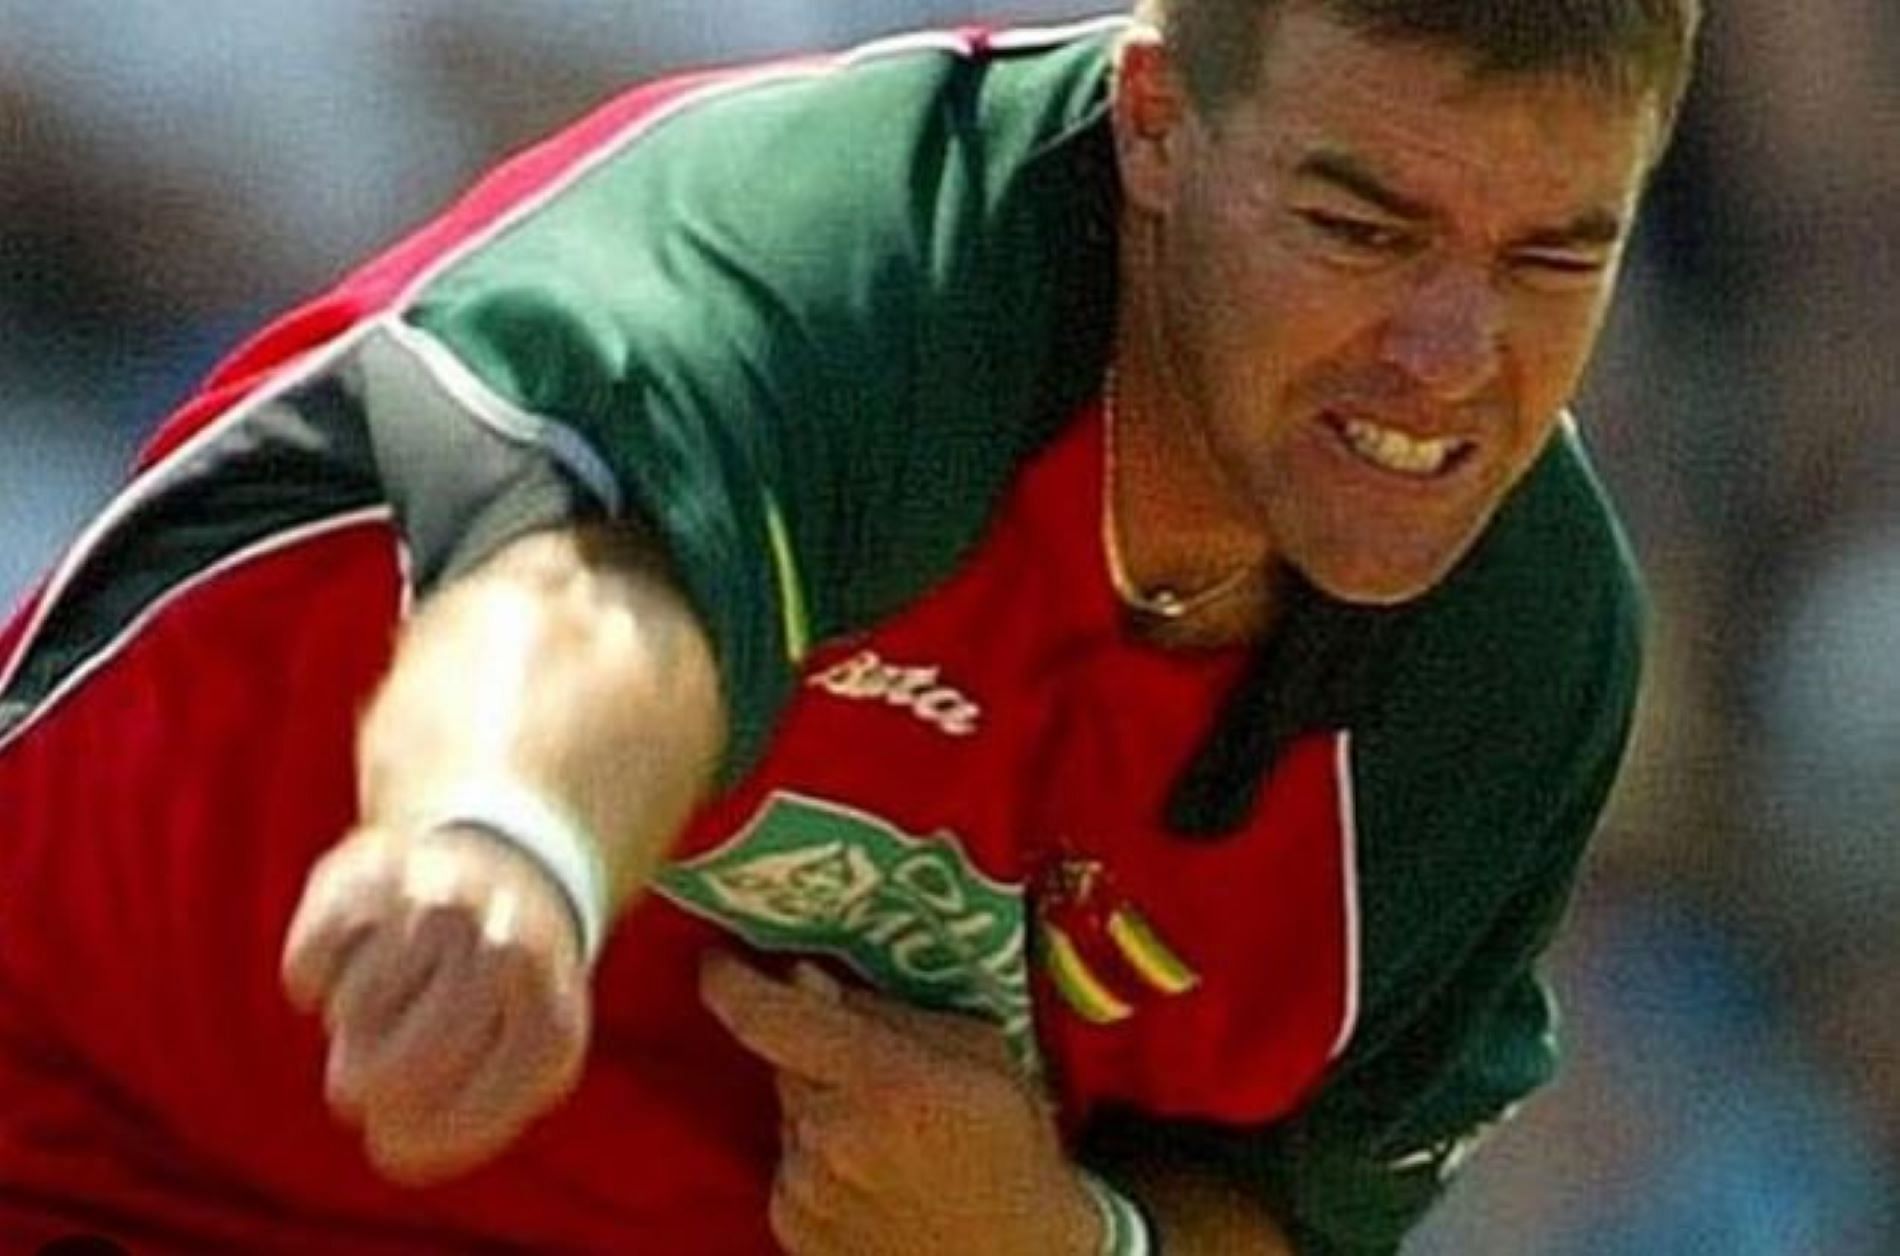 Heath Streak produced his best-ever ODI figures in the game.